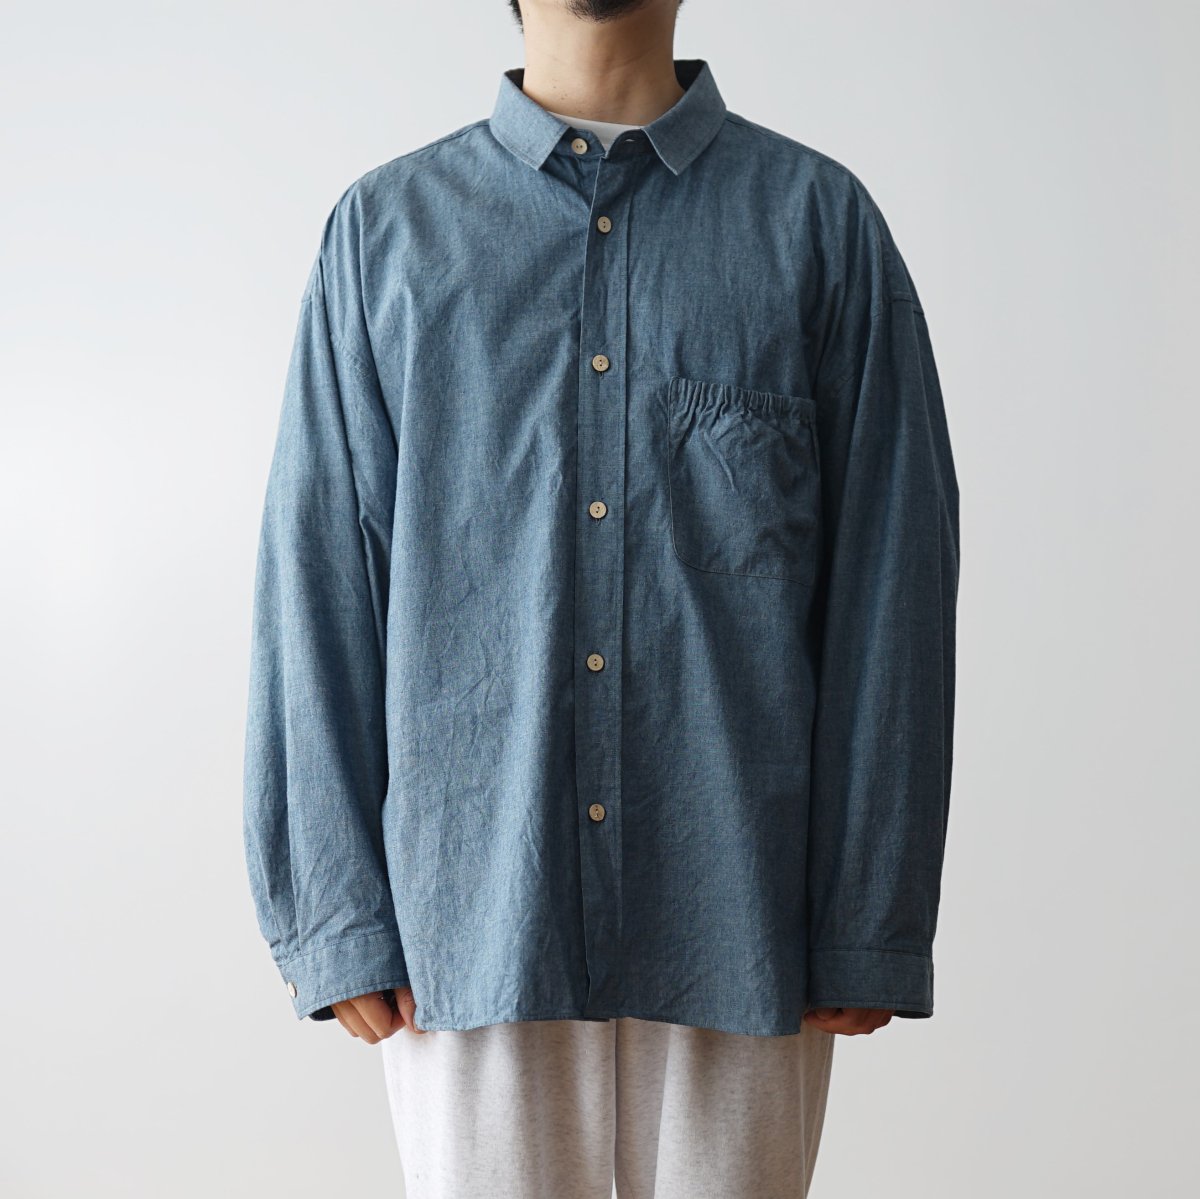 【refomed リフォメッド】 WRIST PATCH WIDE SHIRT "CHAMBRAY" - INDIGO / PARK